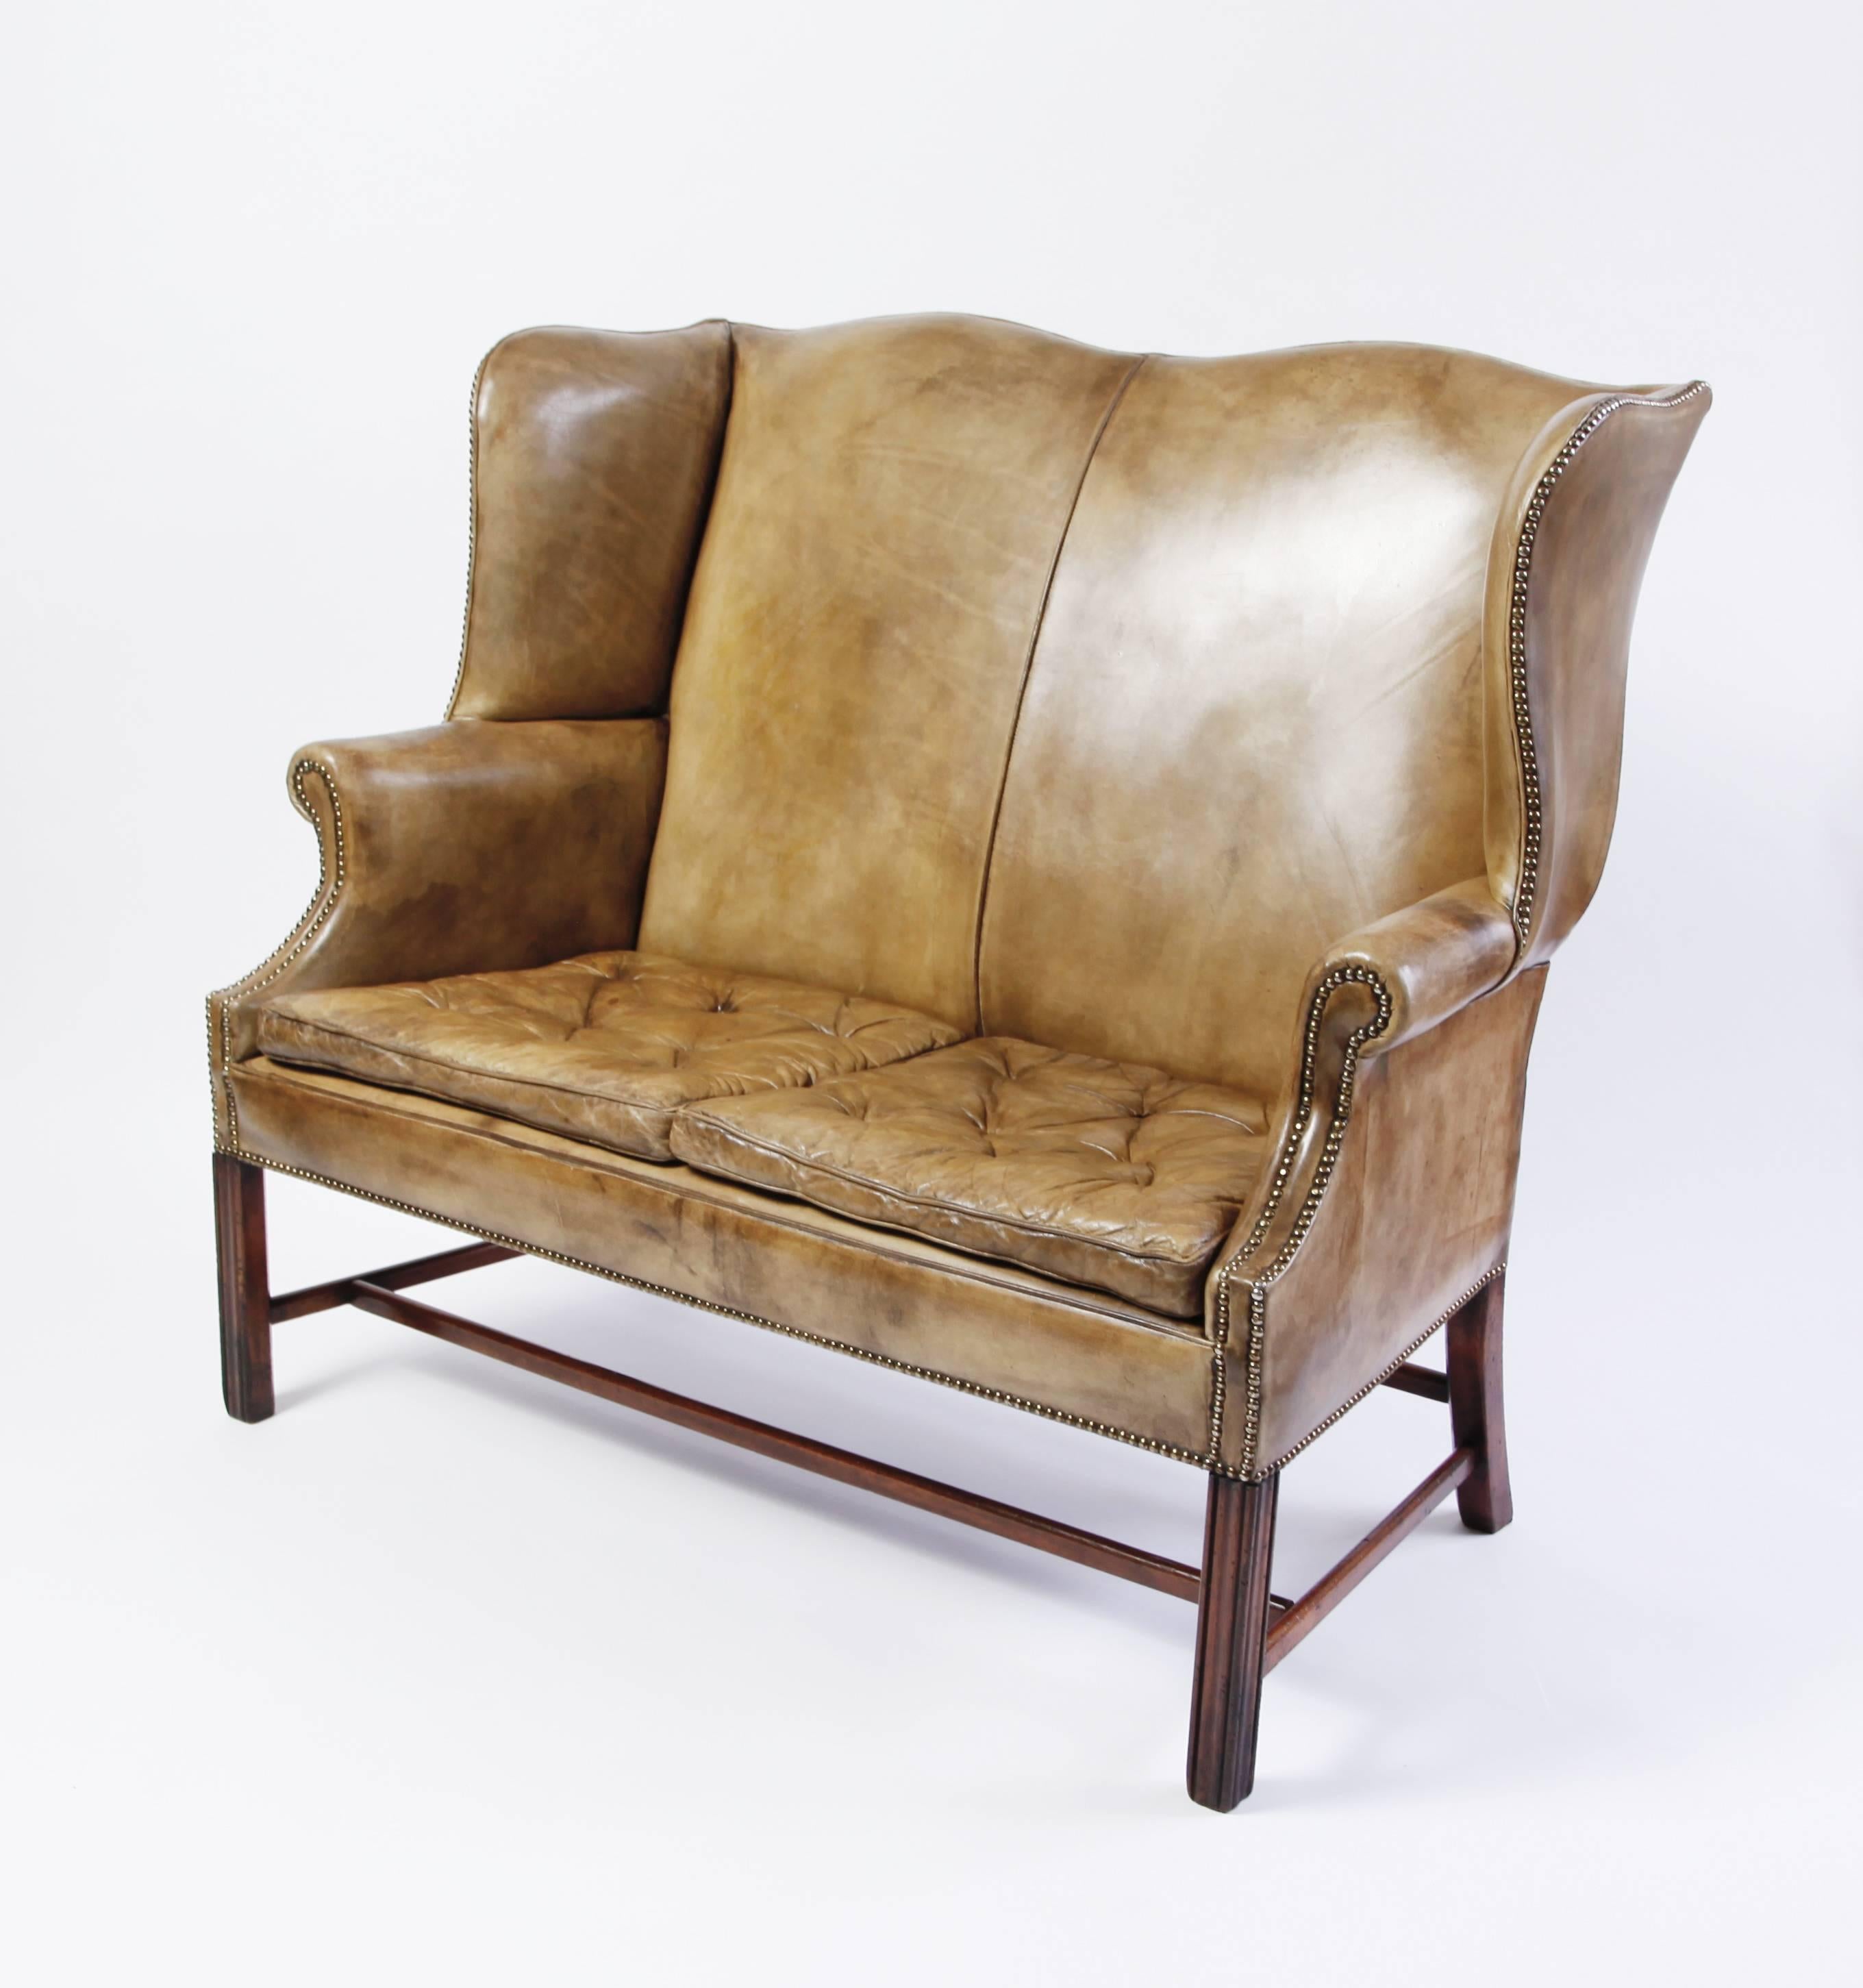 A curvaceous George III-style settee from the late 19th - early 20th century. Mahogany legs, wonderfully patinated original leather. 